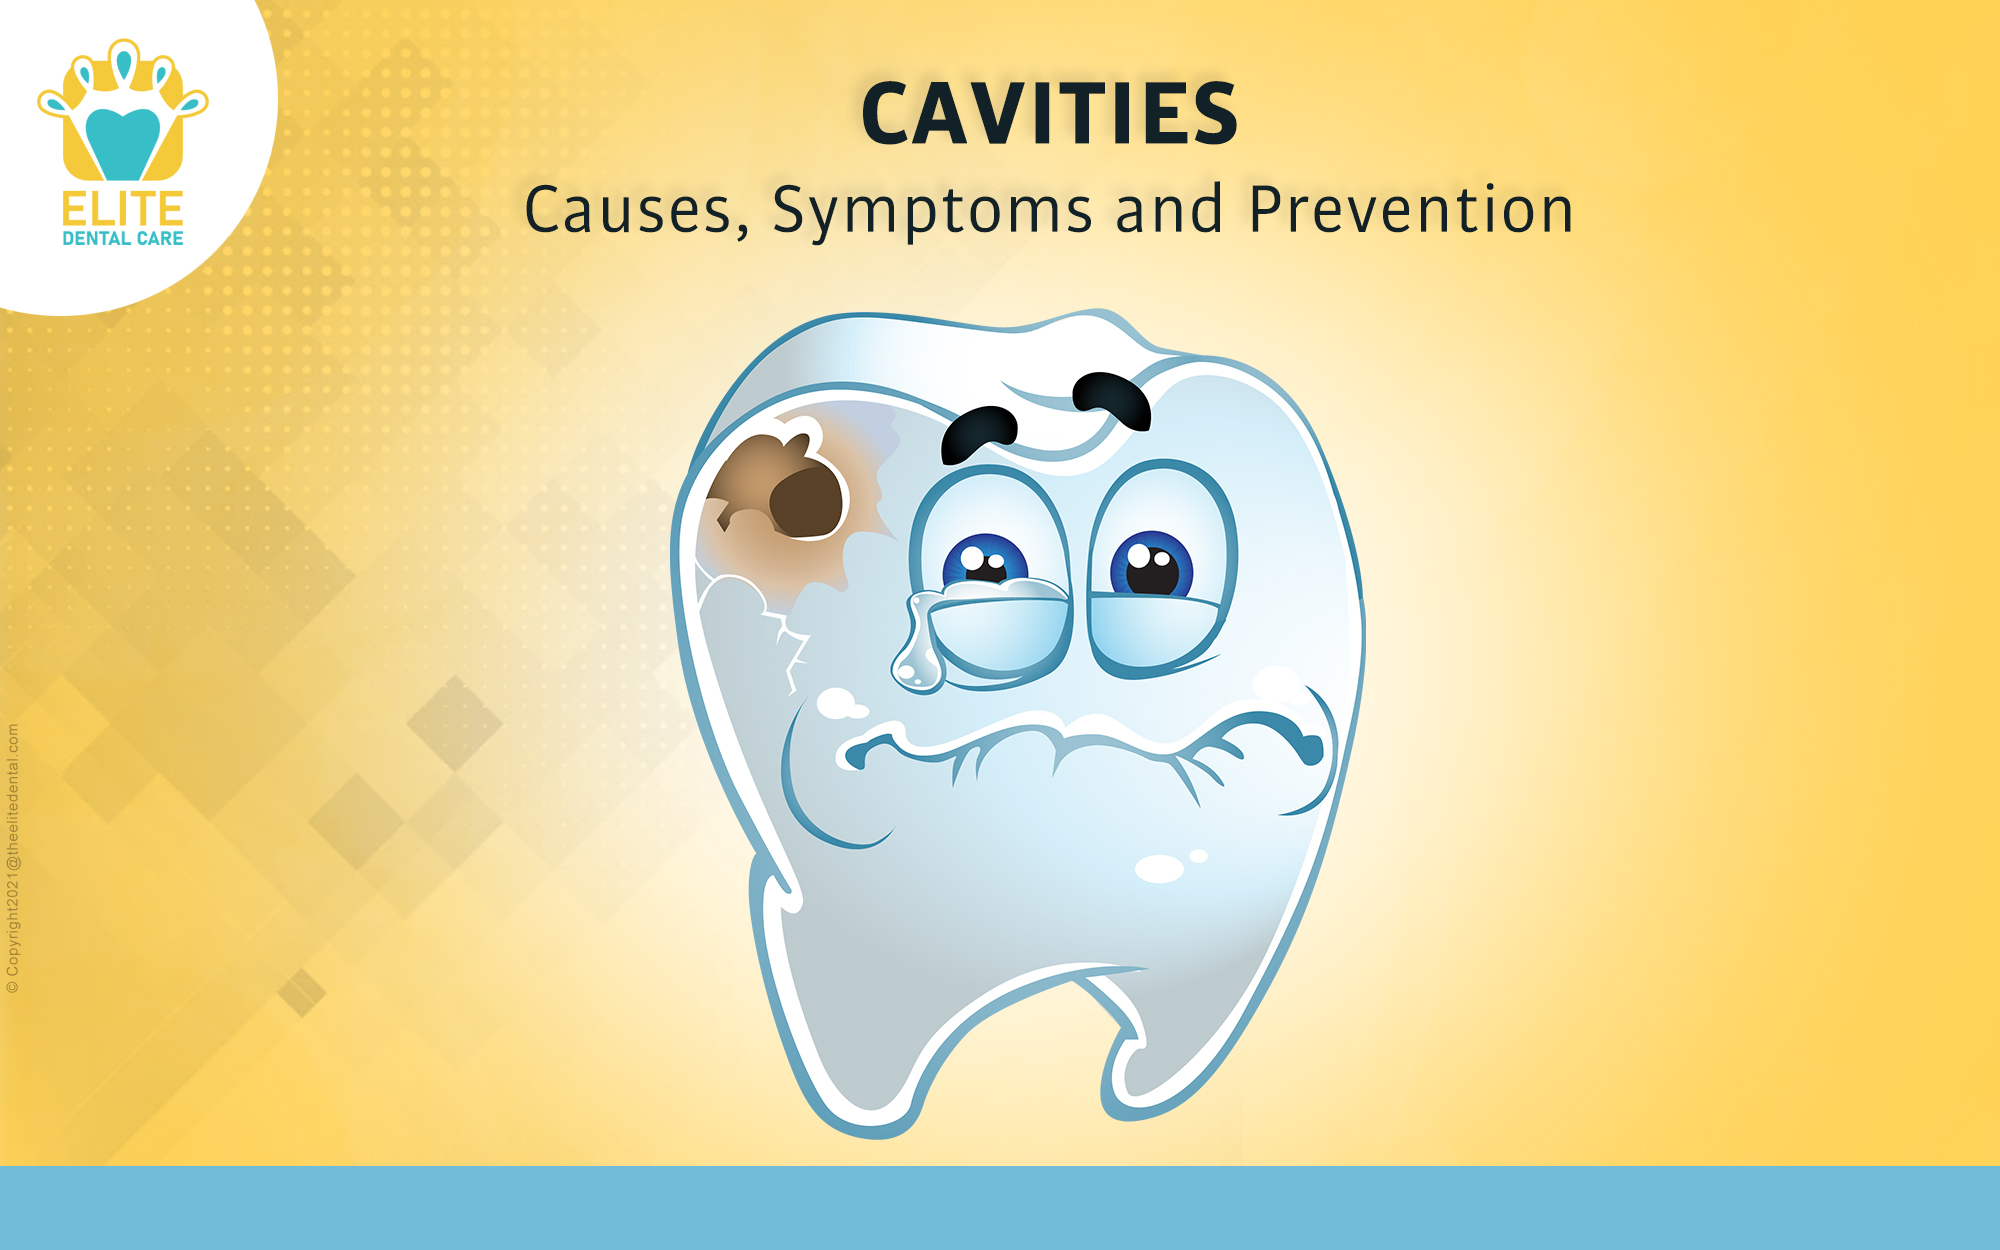 Cavities: Causes, Symptoms and Prevention